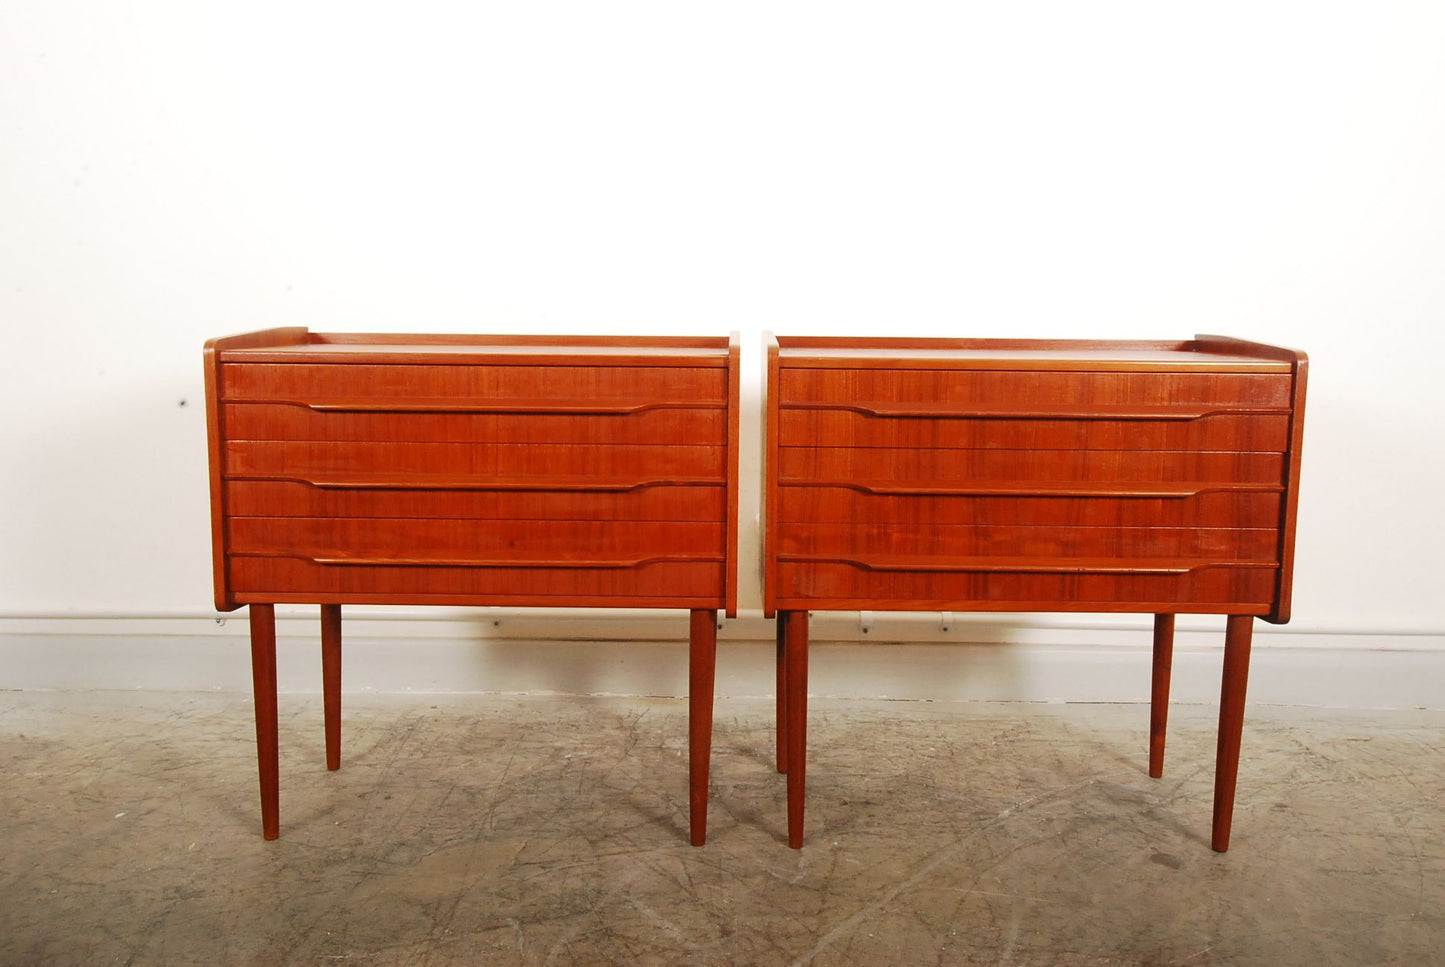 Pair of low chests / bedside tables